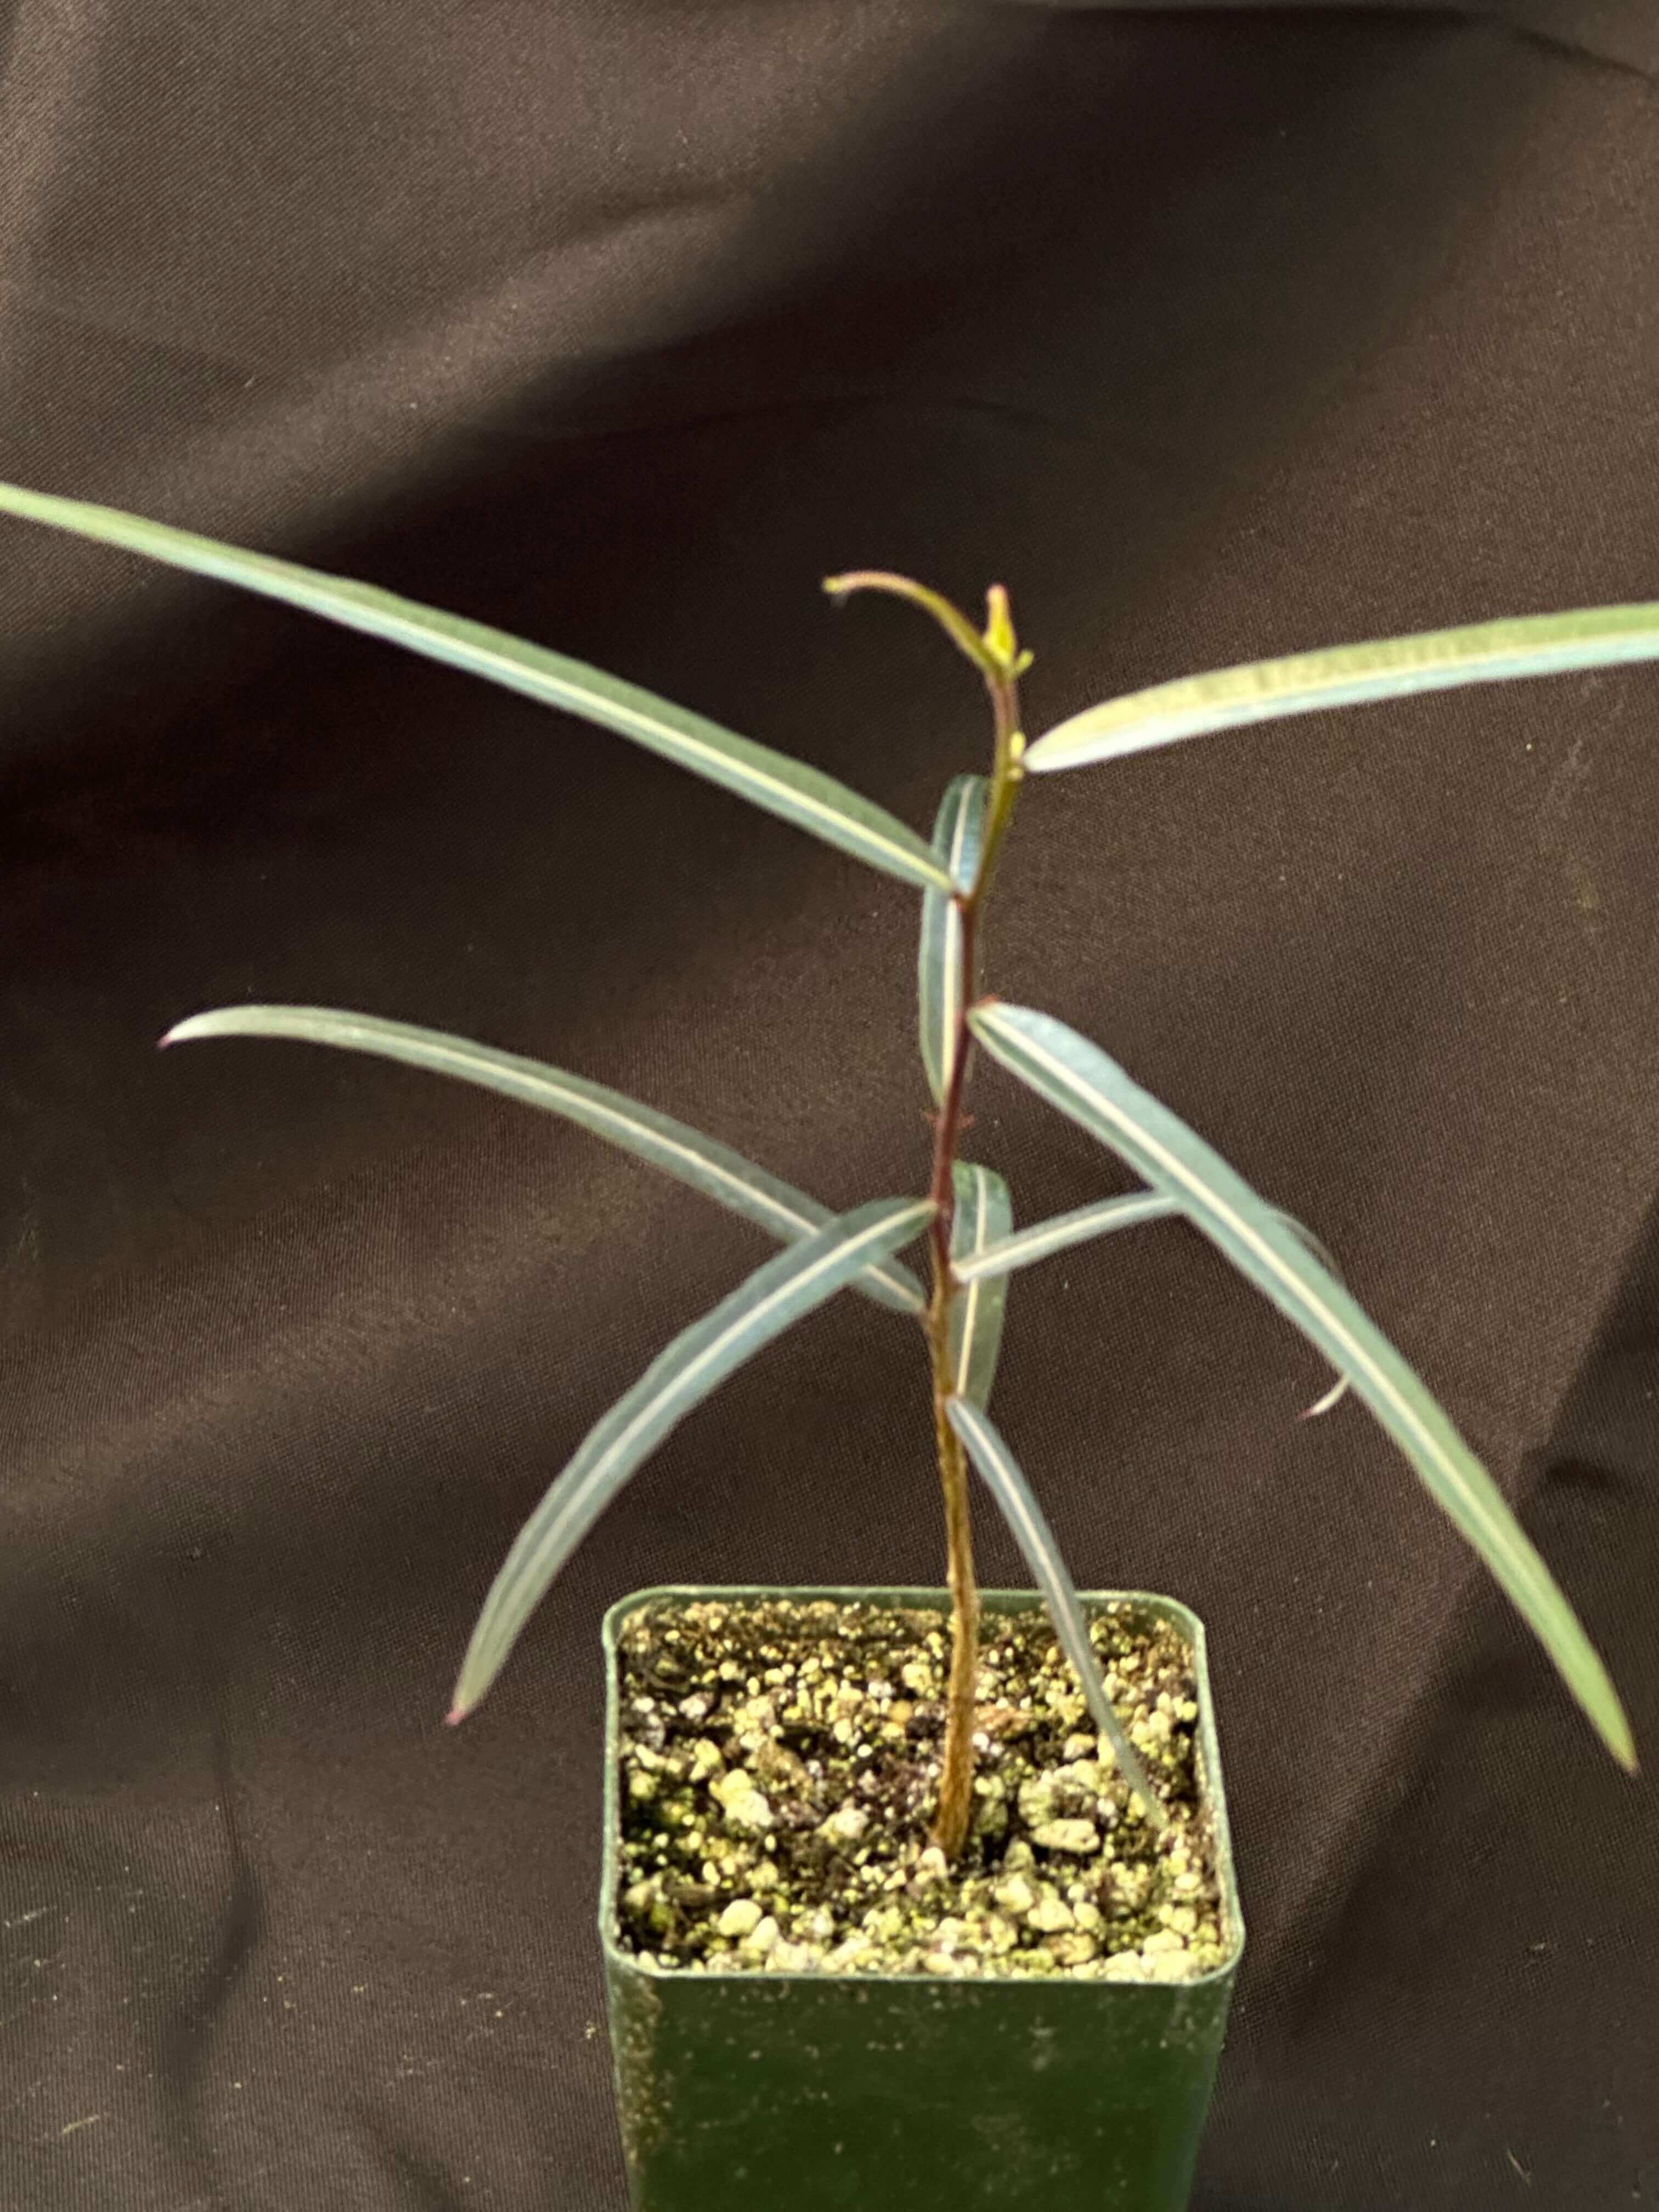 Young Brachychiton Rupestris plant in a 4-inch nursery pot, showcasing its thick, bottle-shaped trunk characteristic of the Queensland Bottle Tree.